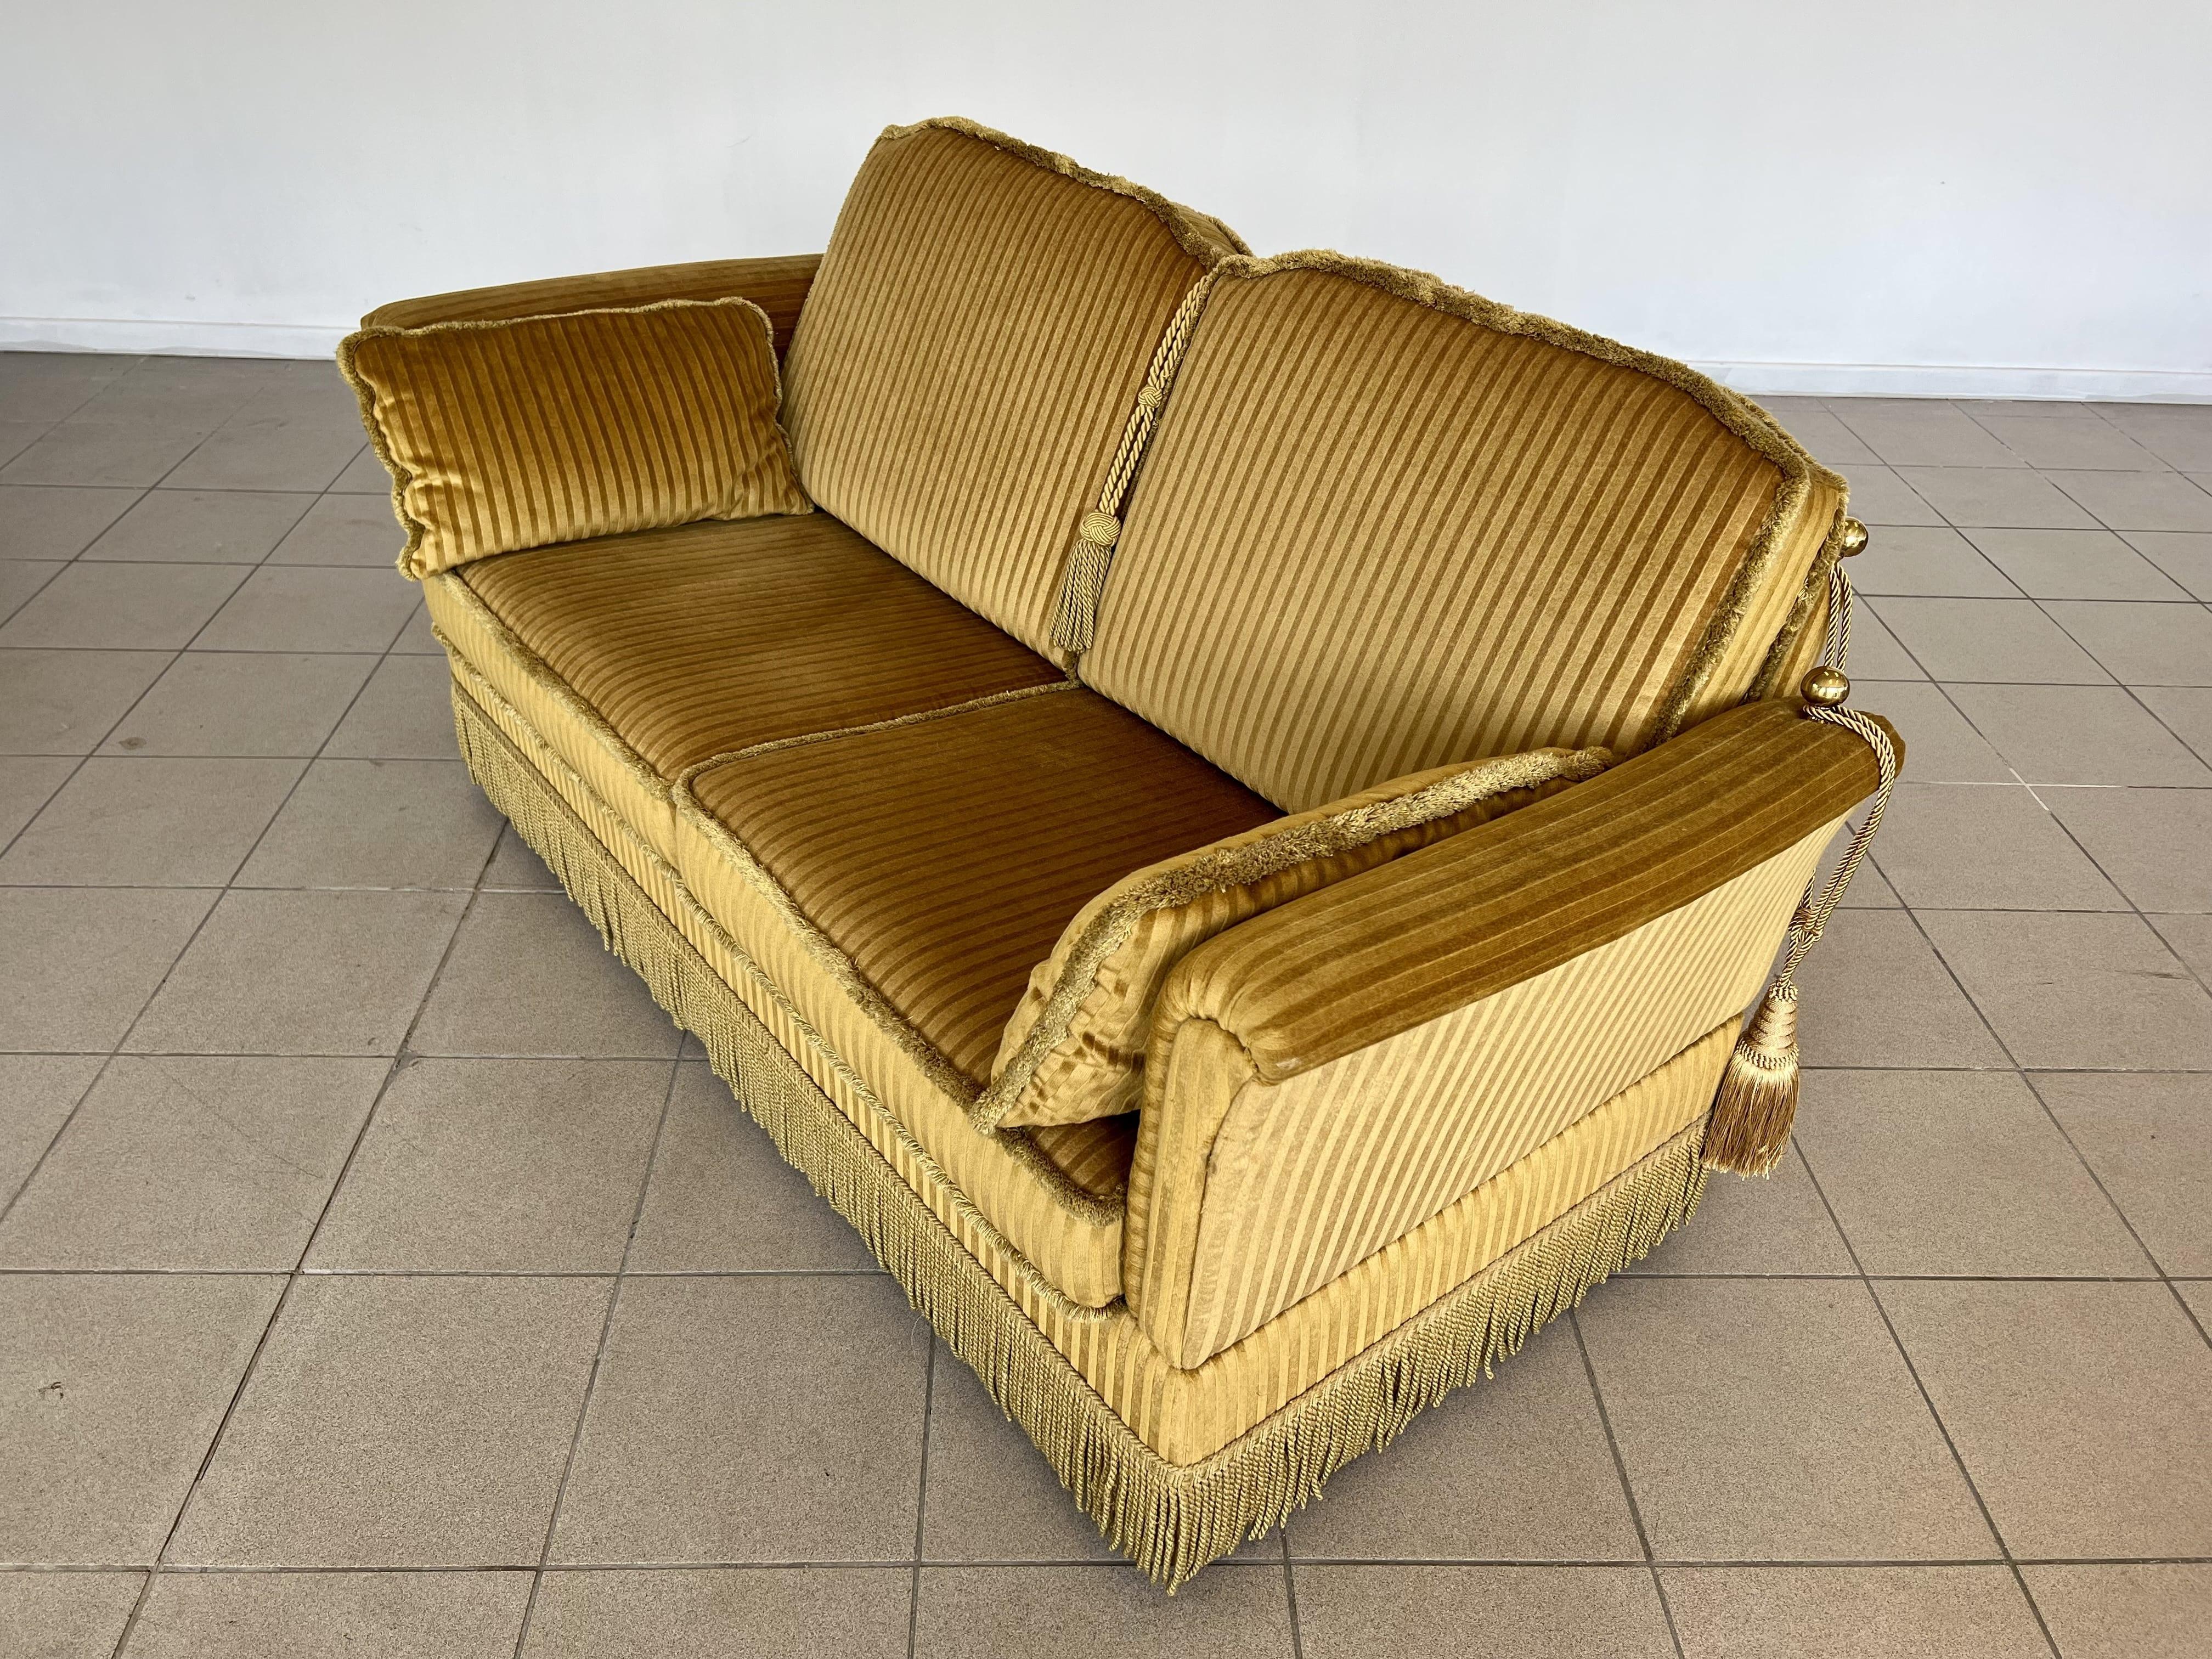 Vintage Art Deco Styled Adjustable Sofa Bed With Cushions and Fringes im Angebot 1